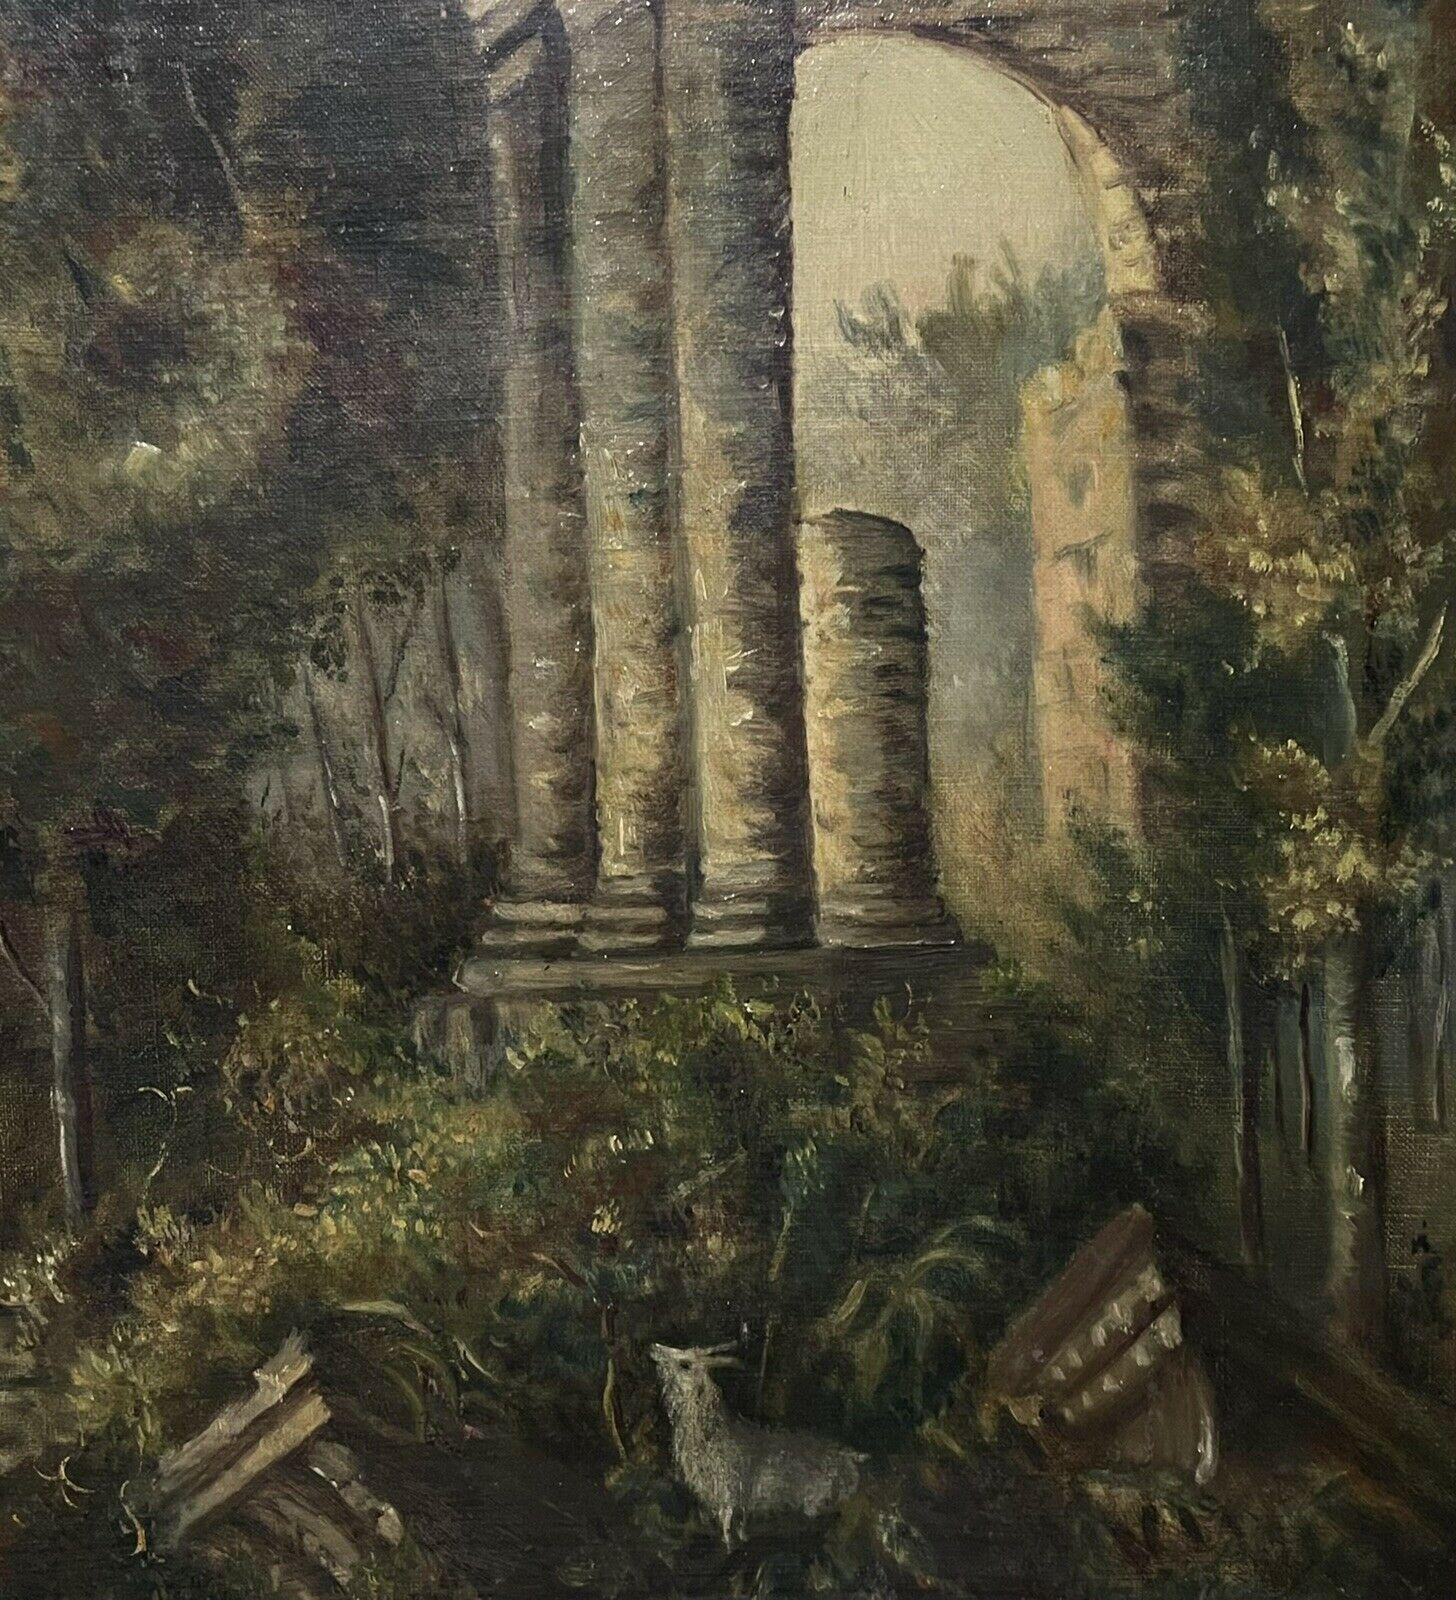 Artist/ School: French School, 19th century

Title: Classical Landscape with figures amongst ancient ruins. 

Medium: oil painting on canvas, unframed. 

canvas:  24.5 x 36 inches

Provenance: private collection, France

Condition: The painting is